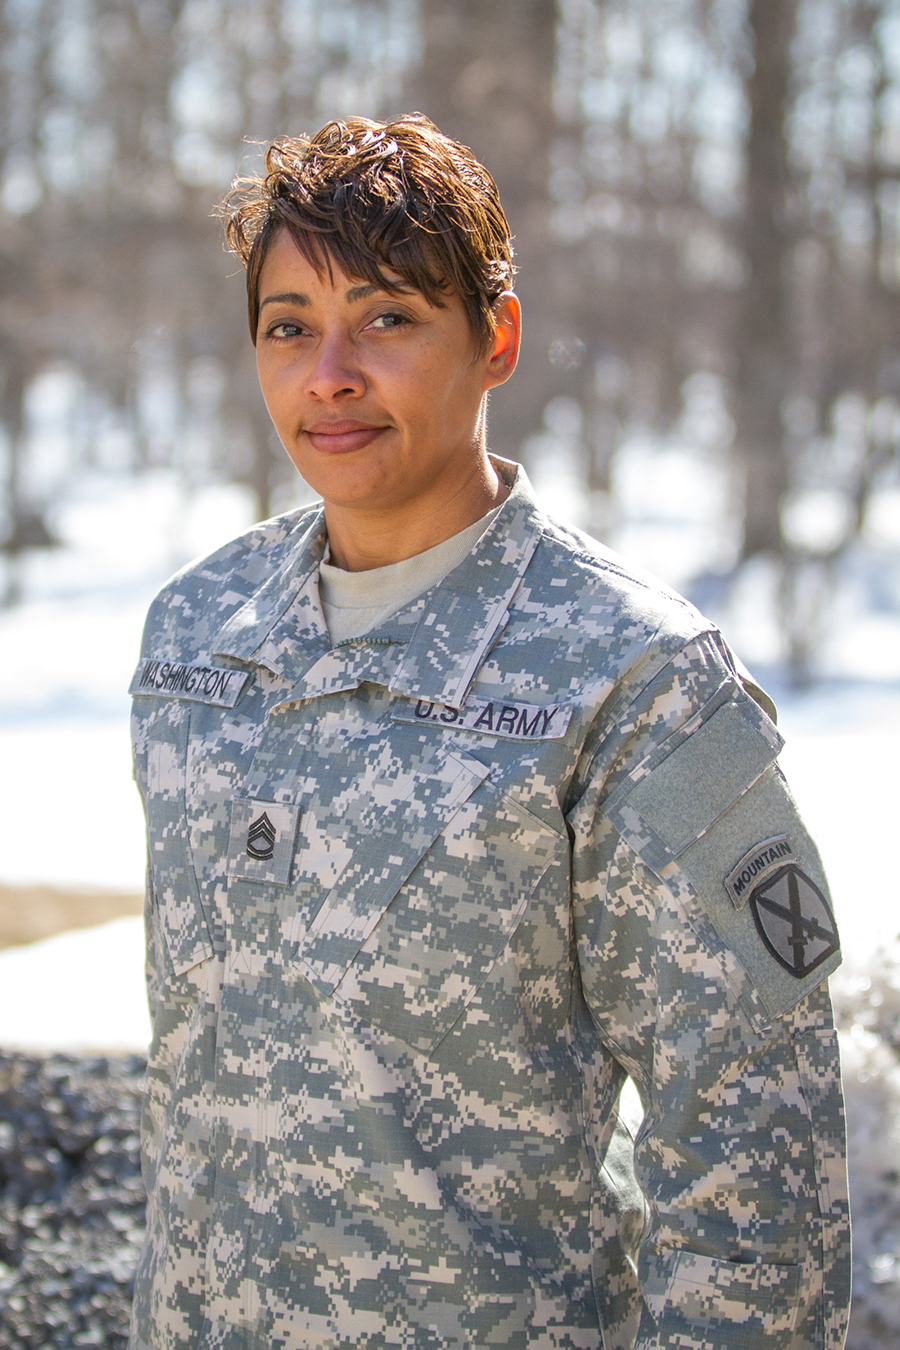 Face Of Defense Army Nco Acclaimed For Sharp Work U S Department Of